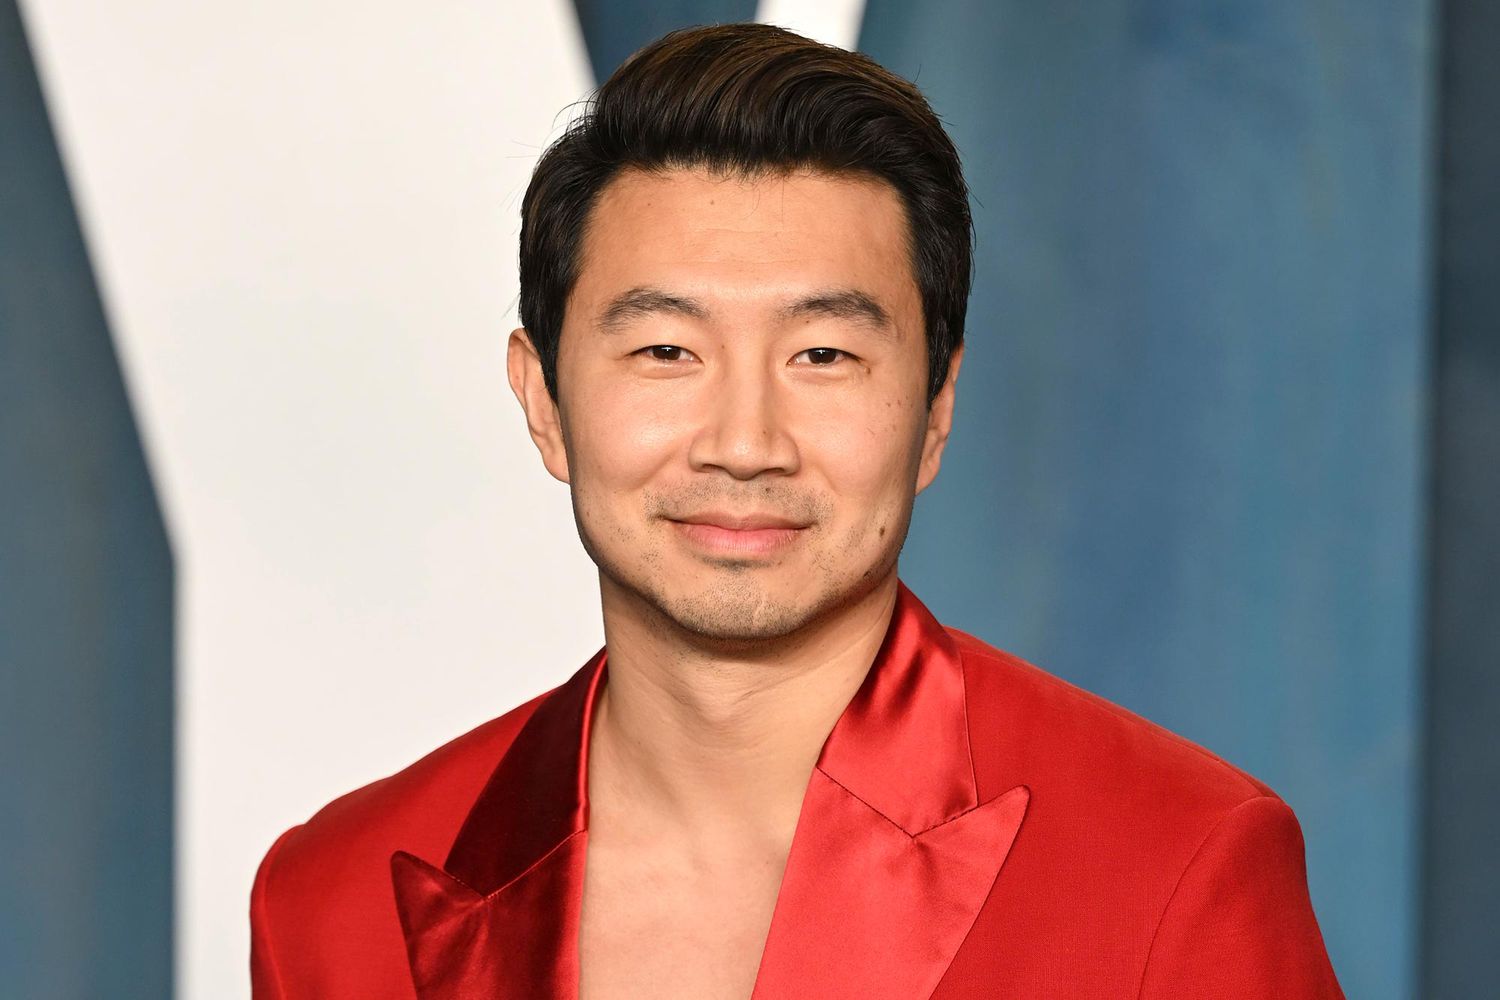 Simu Liu attends the 2022 Vanity Fair Oscar Party hosted by Radhika Jones at Wallis Annenberg Center for the Performing Arts on March 27, 2022 in Beverly Hills, California.